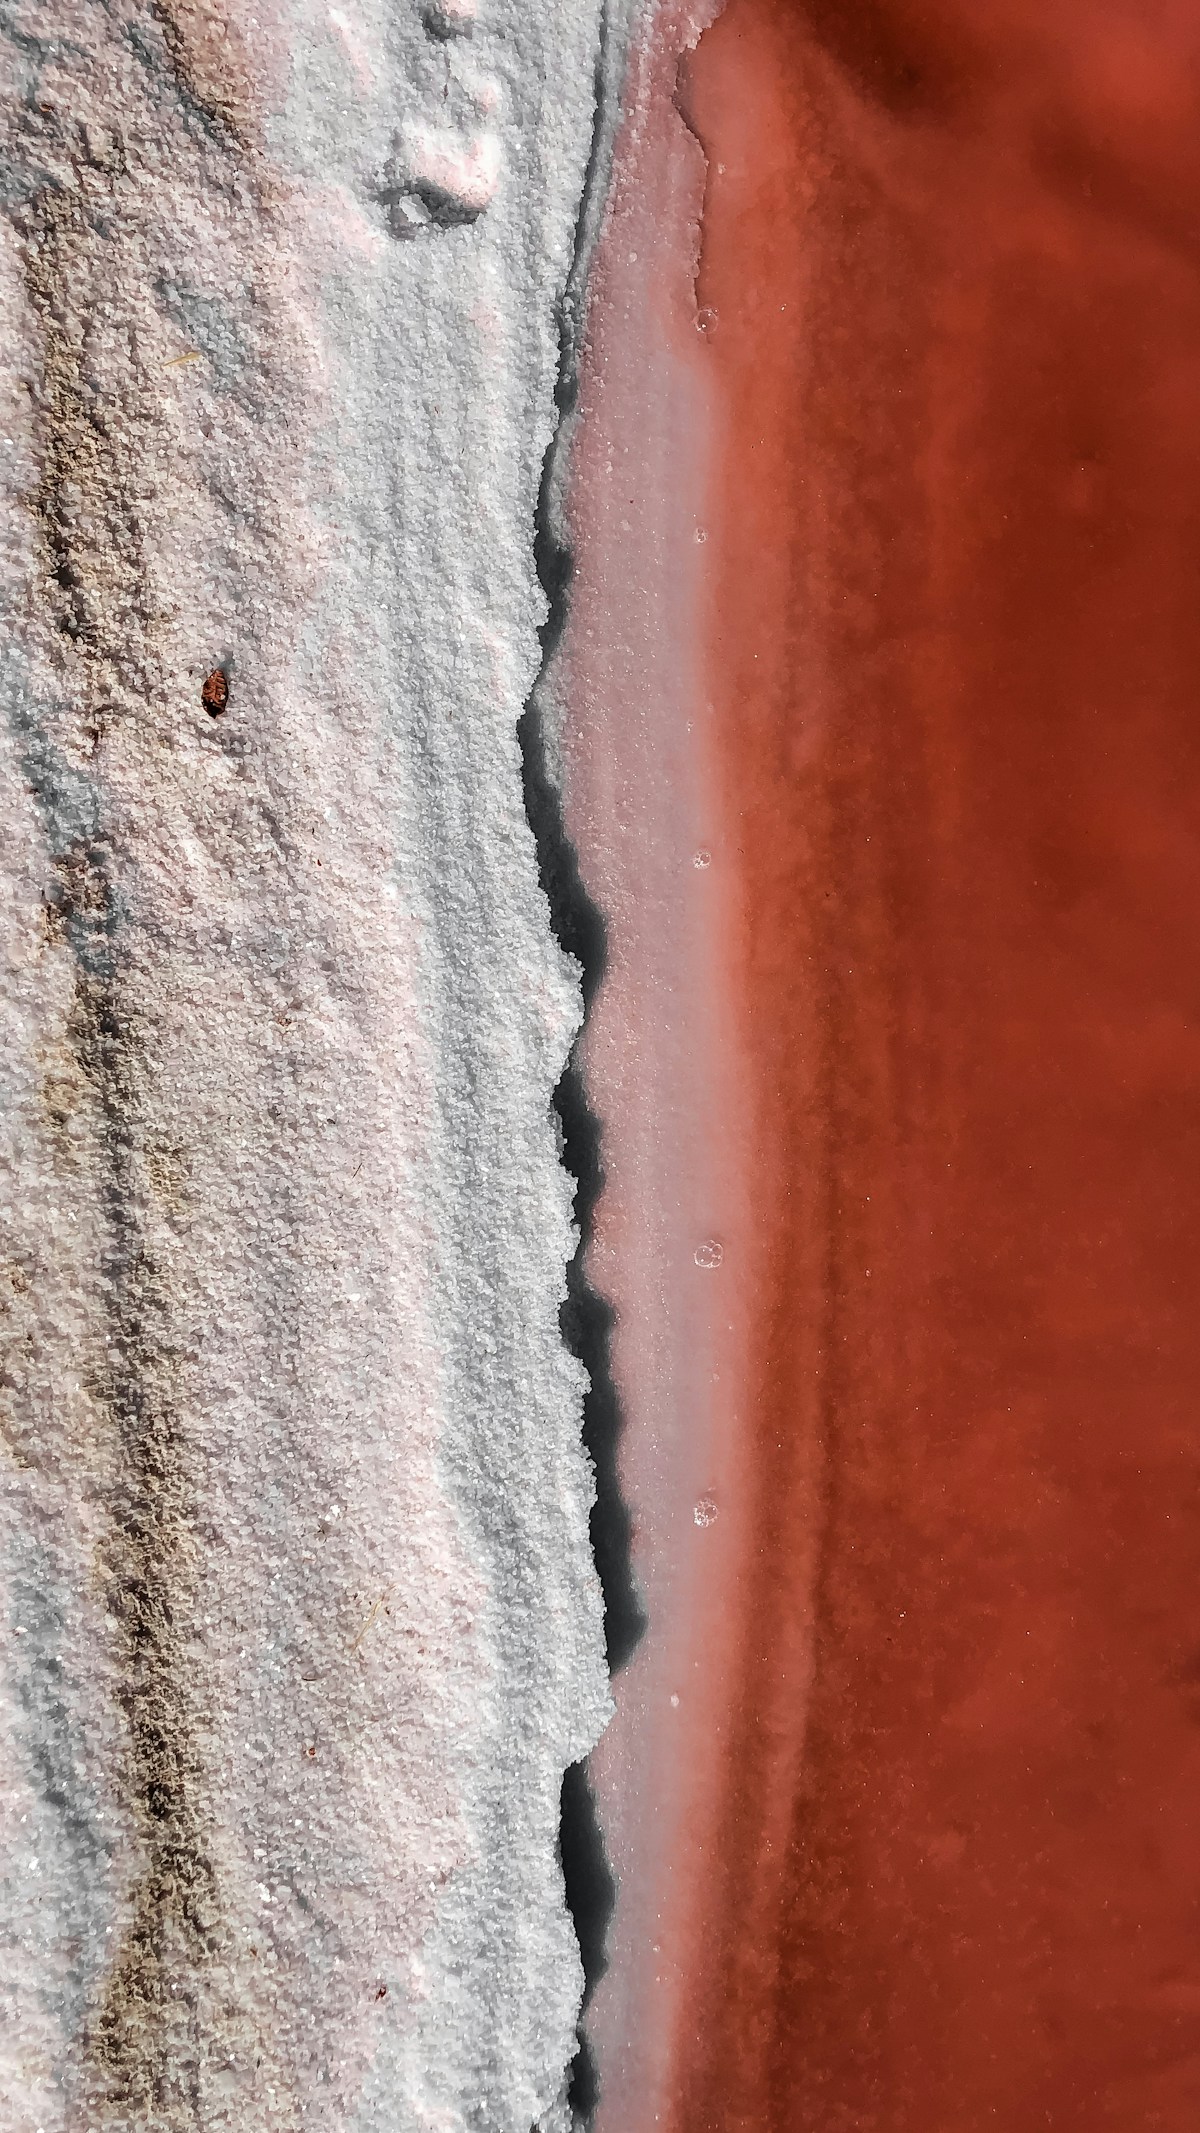 Grey and brown striated rock meeting up against red rock with pink edge.  There is a dark fissure in the middle.